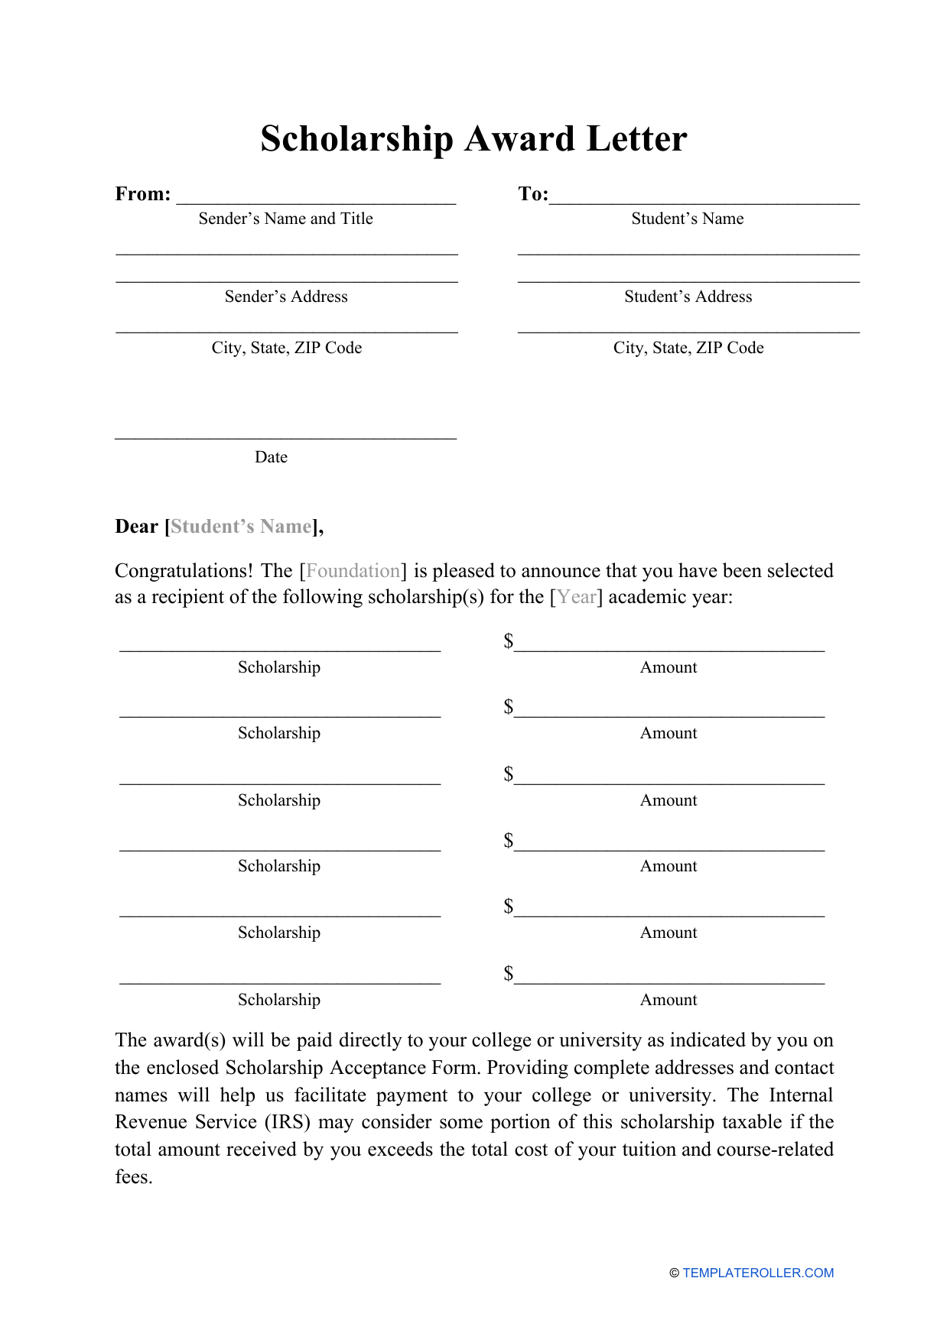 Scholarship Award Letter Template, Page 1